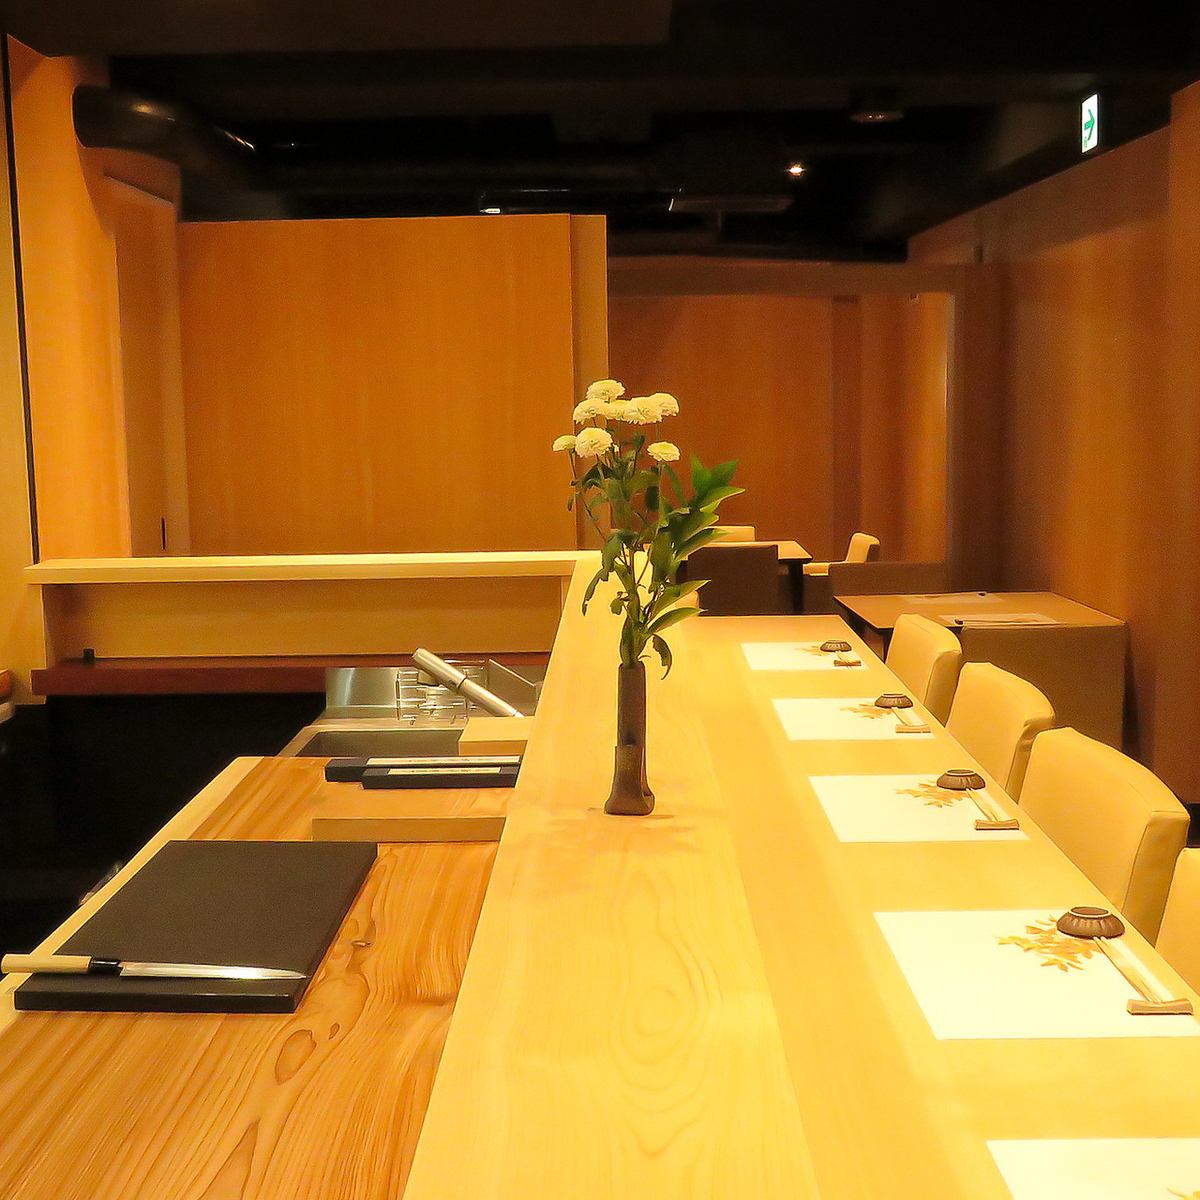 A restaurant where you can casually enjoy authentic Japanese cuisine that looks beautiful! A Japanese restaurant that is a must-see for corporate banquets and entertainment.